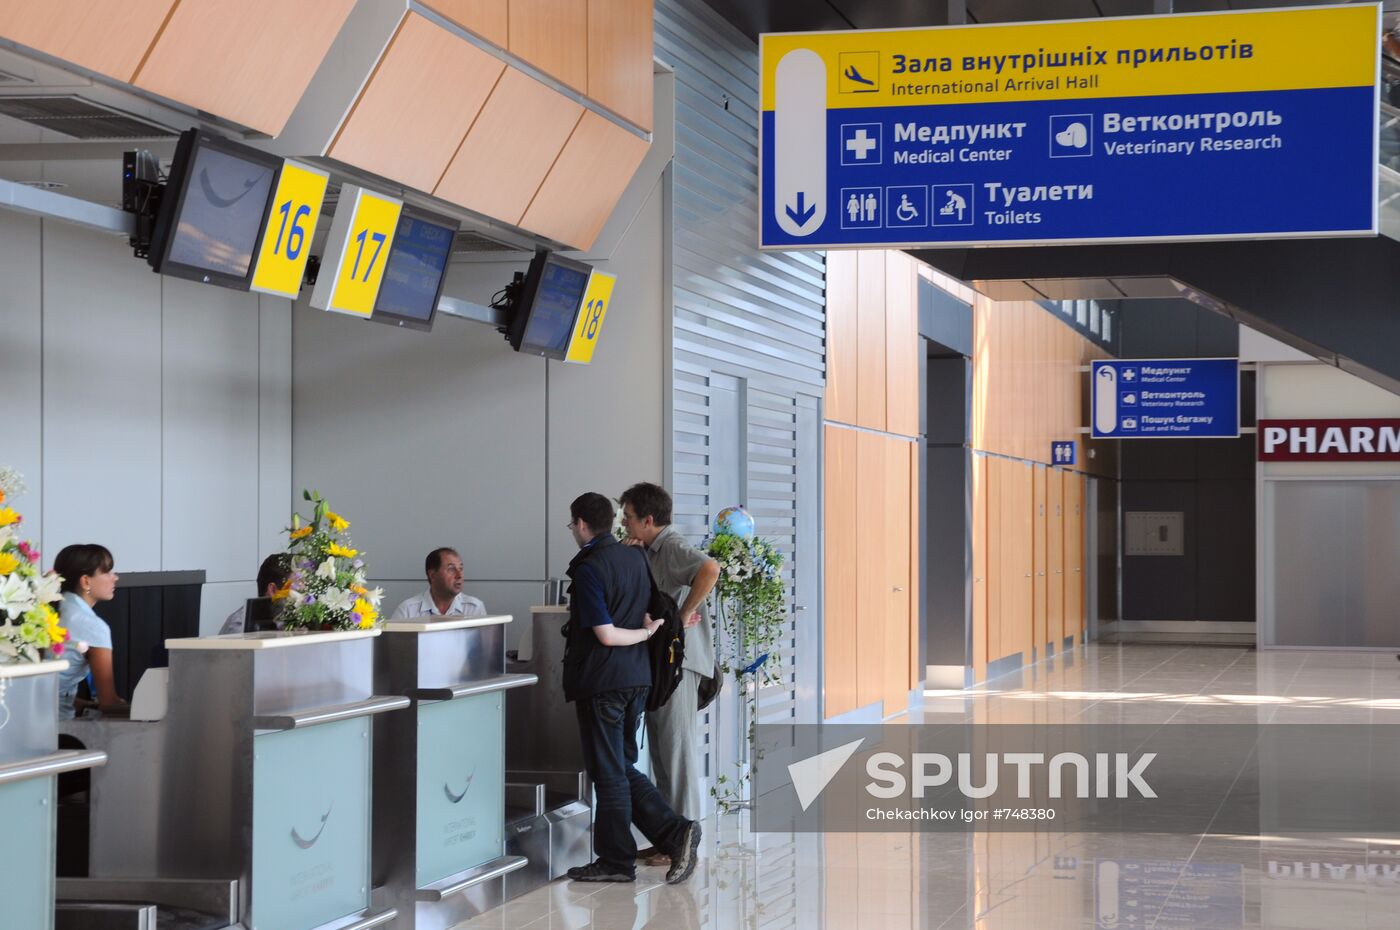 Opening of a new terminal of international airport Kharkov